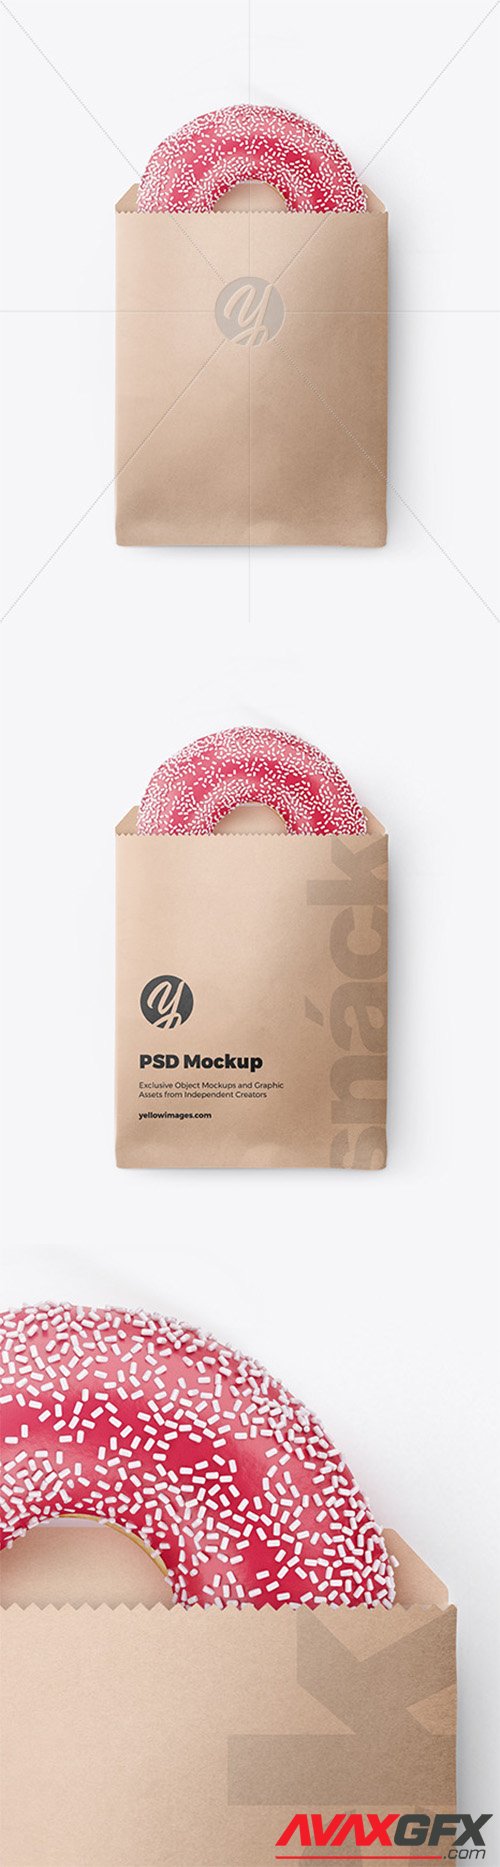 Download 34 Kraft Stand Up Pouch With Candies Front View Yellowimages Yellowimages Mockups